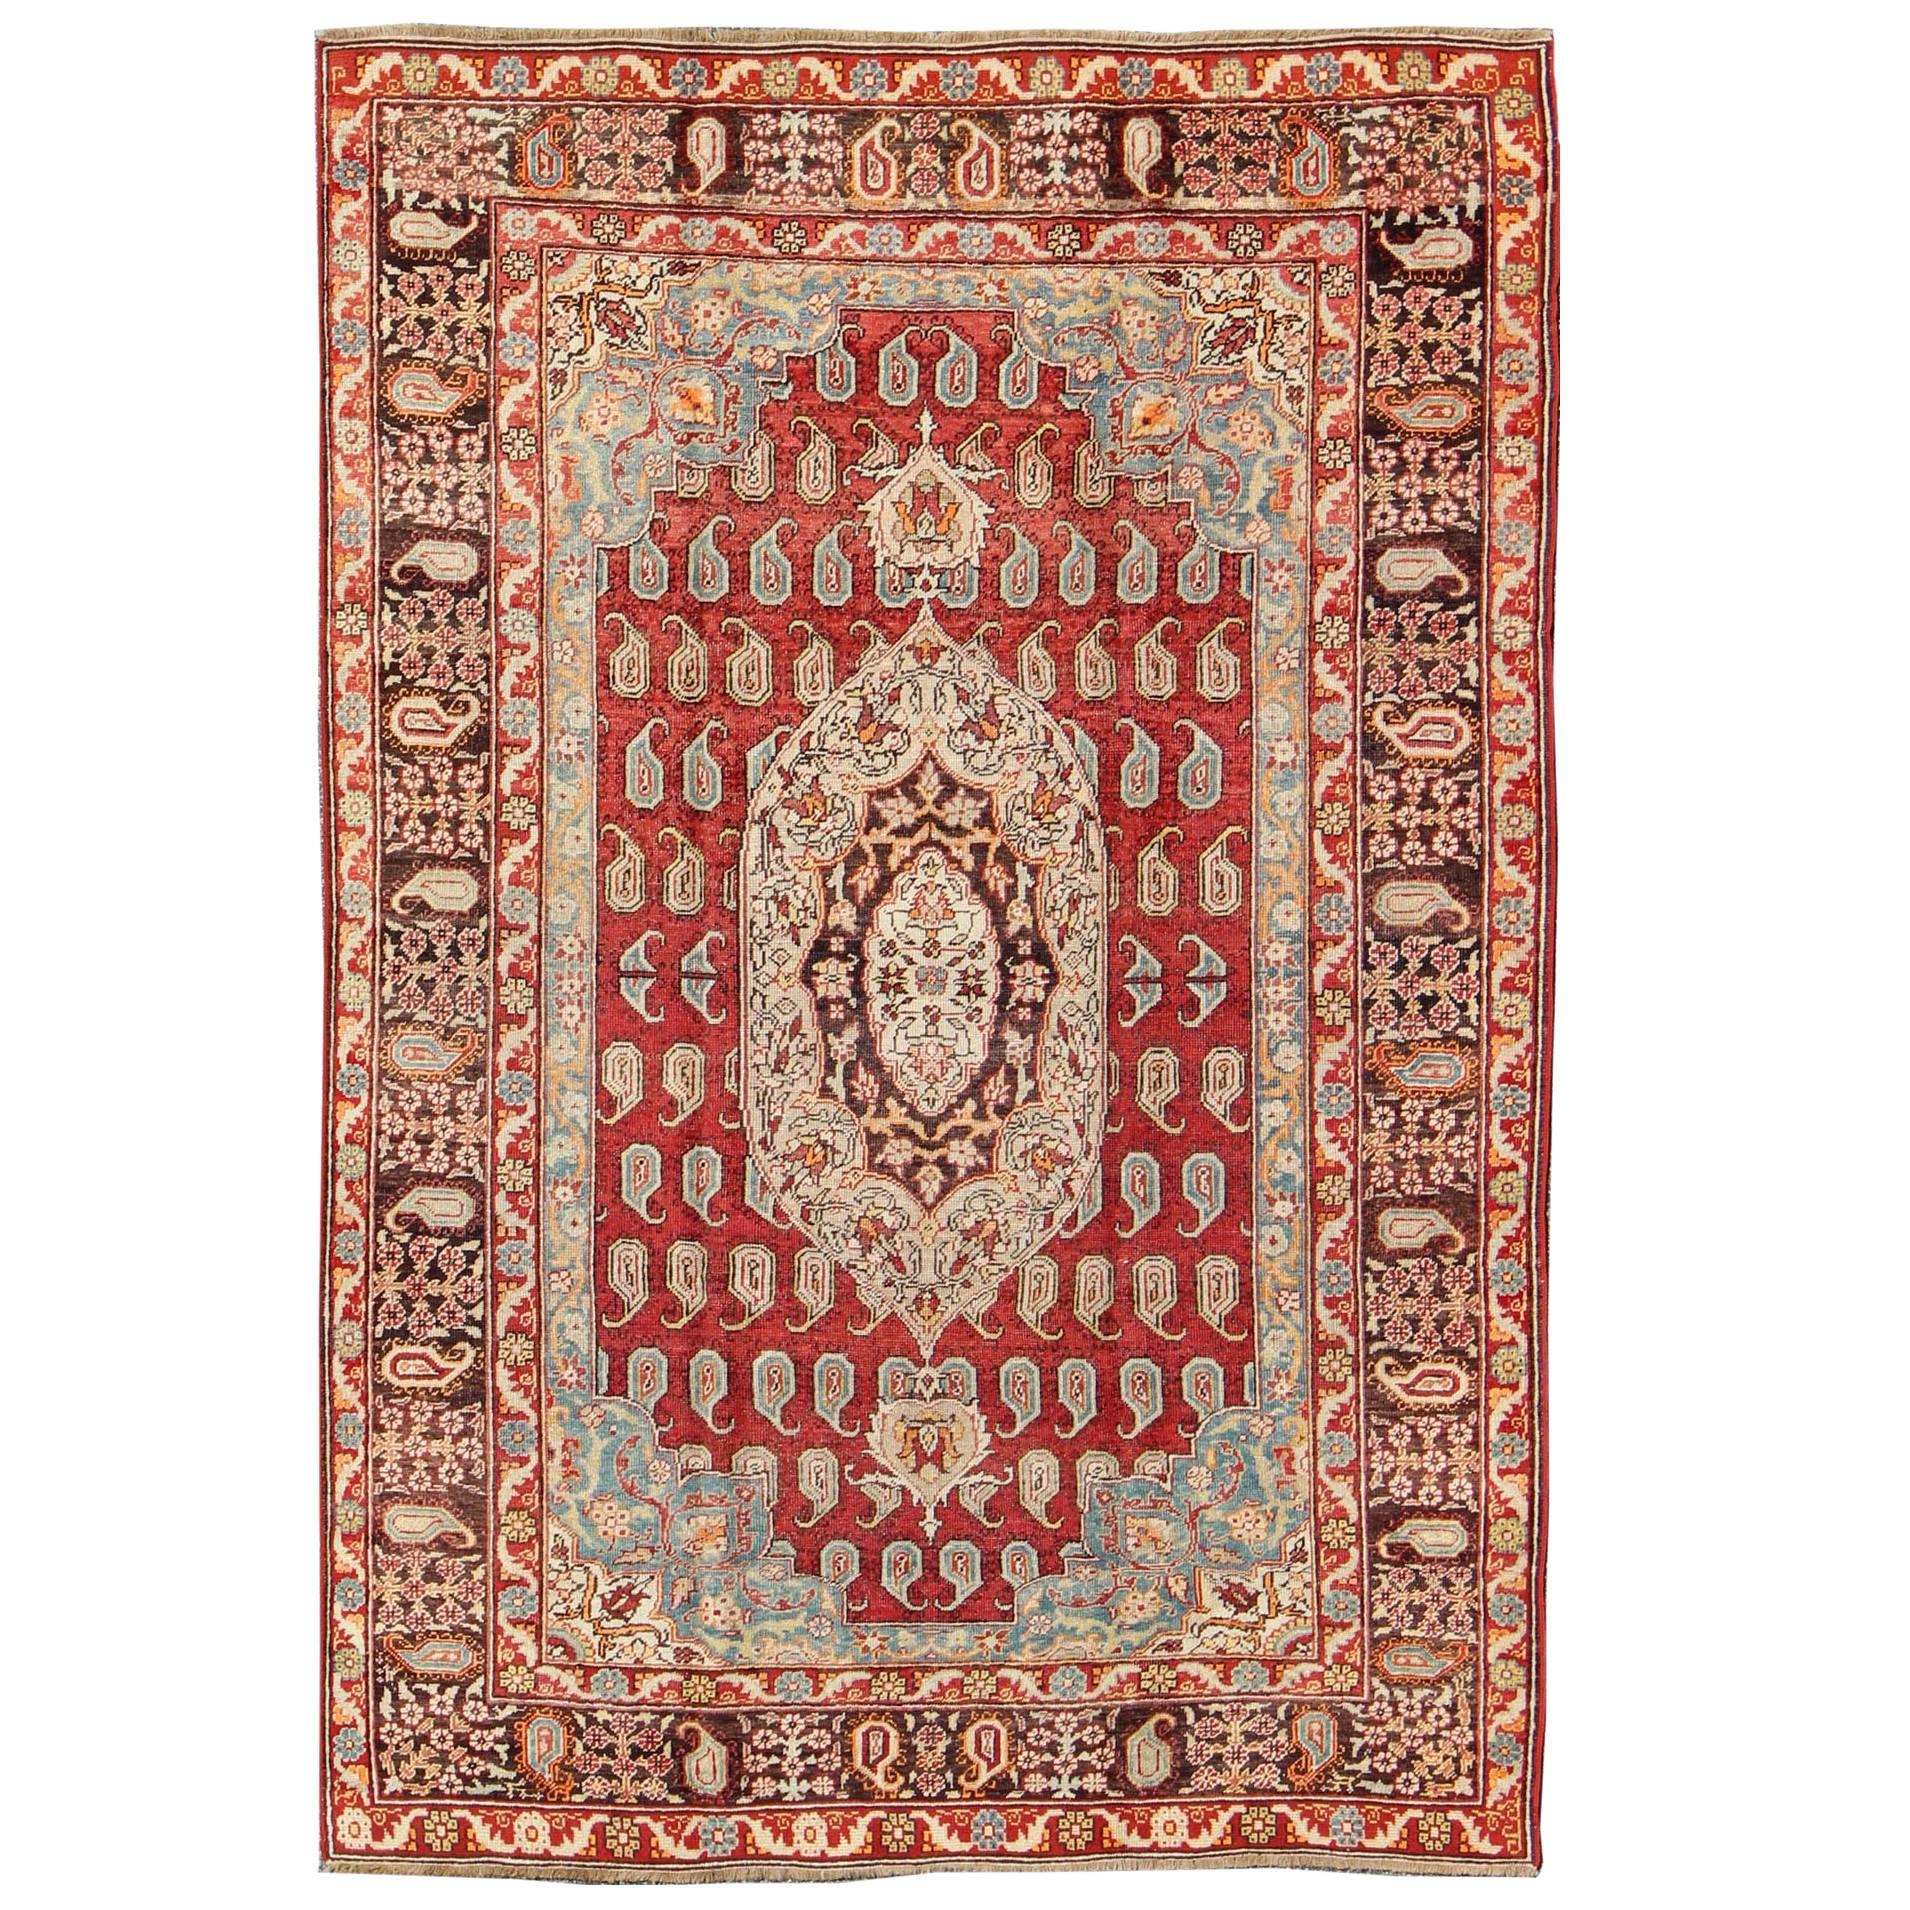 Antique Turkish Oushak Rug with Paisley Design in Red, Brown and Blue For Sale